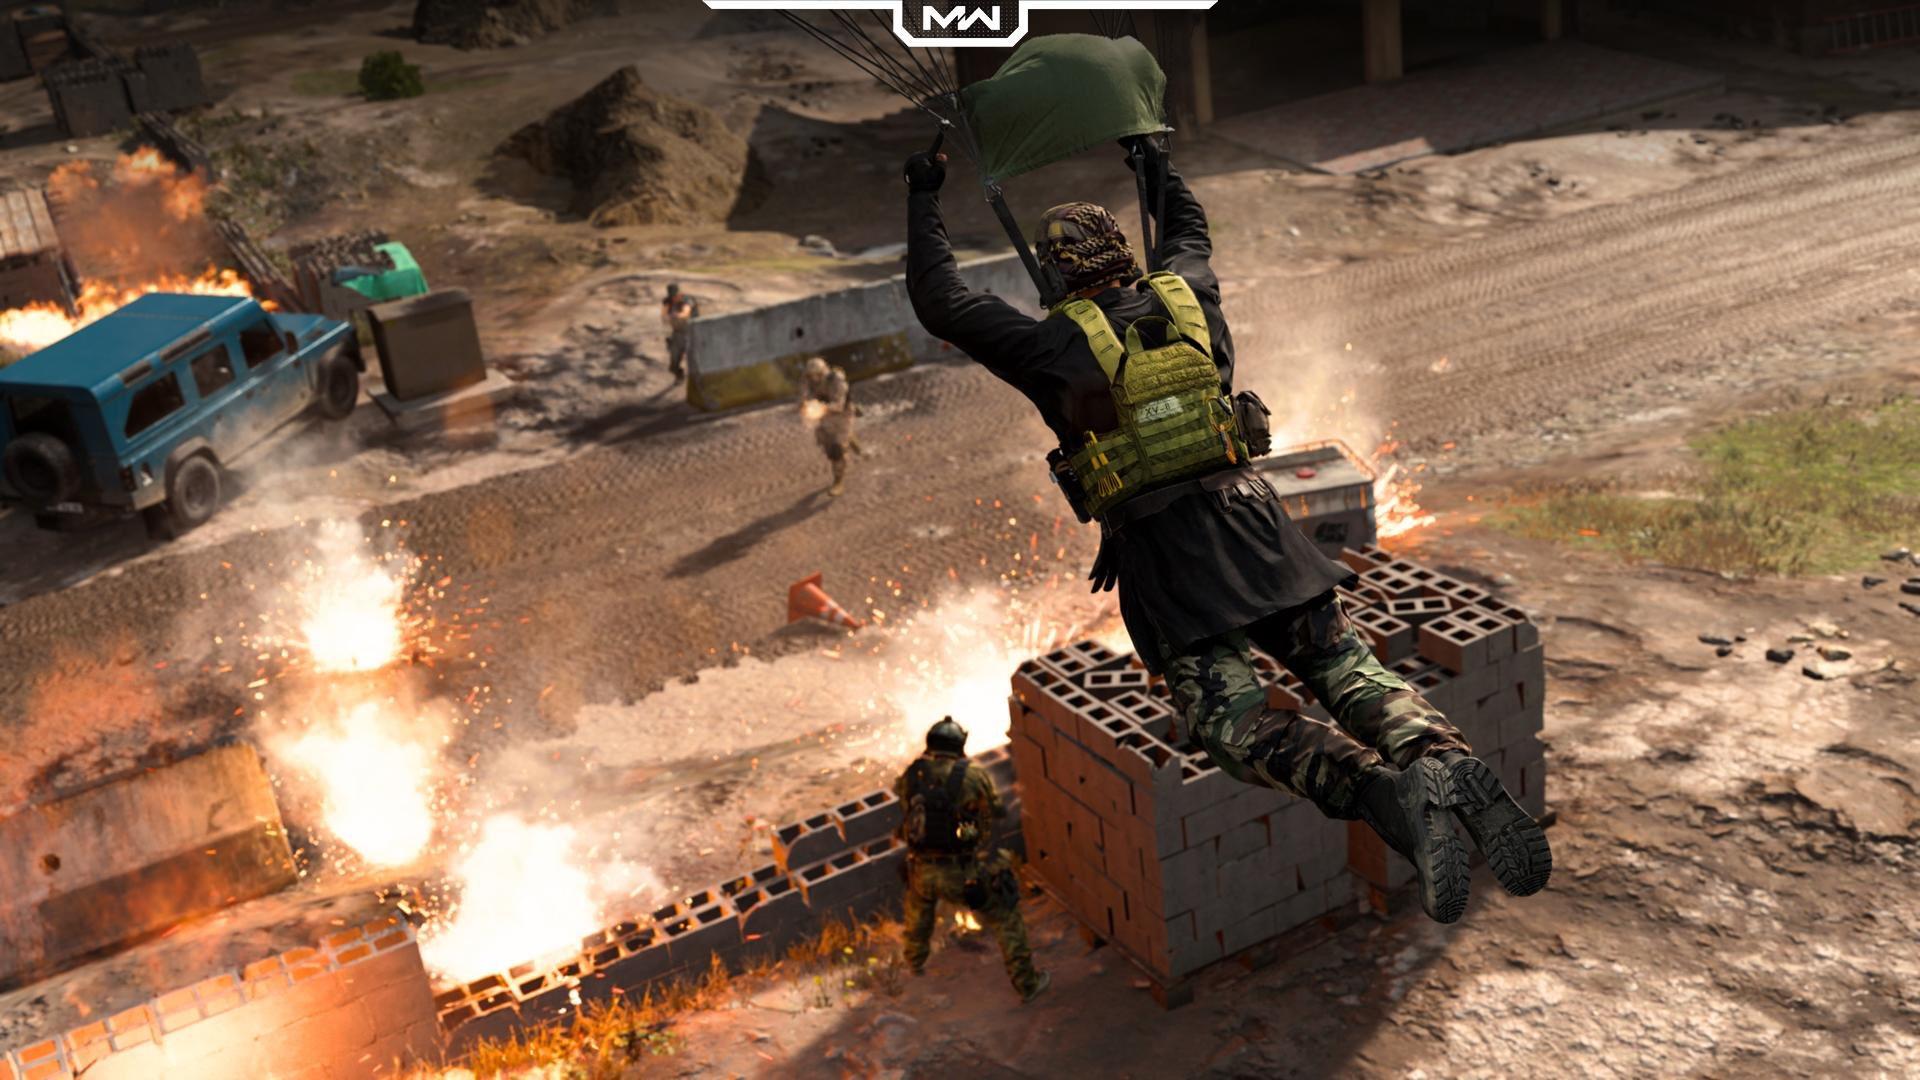 Warzone player parachuting into a fight